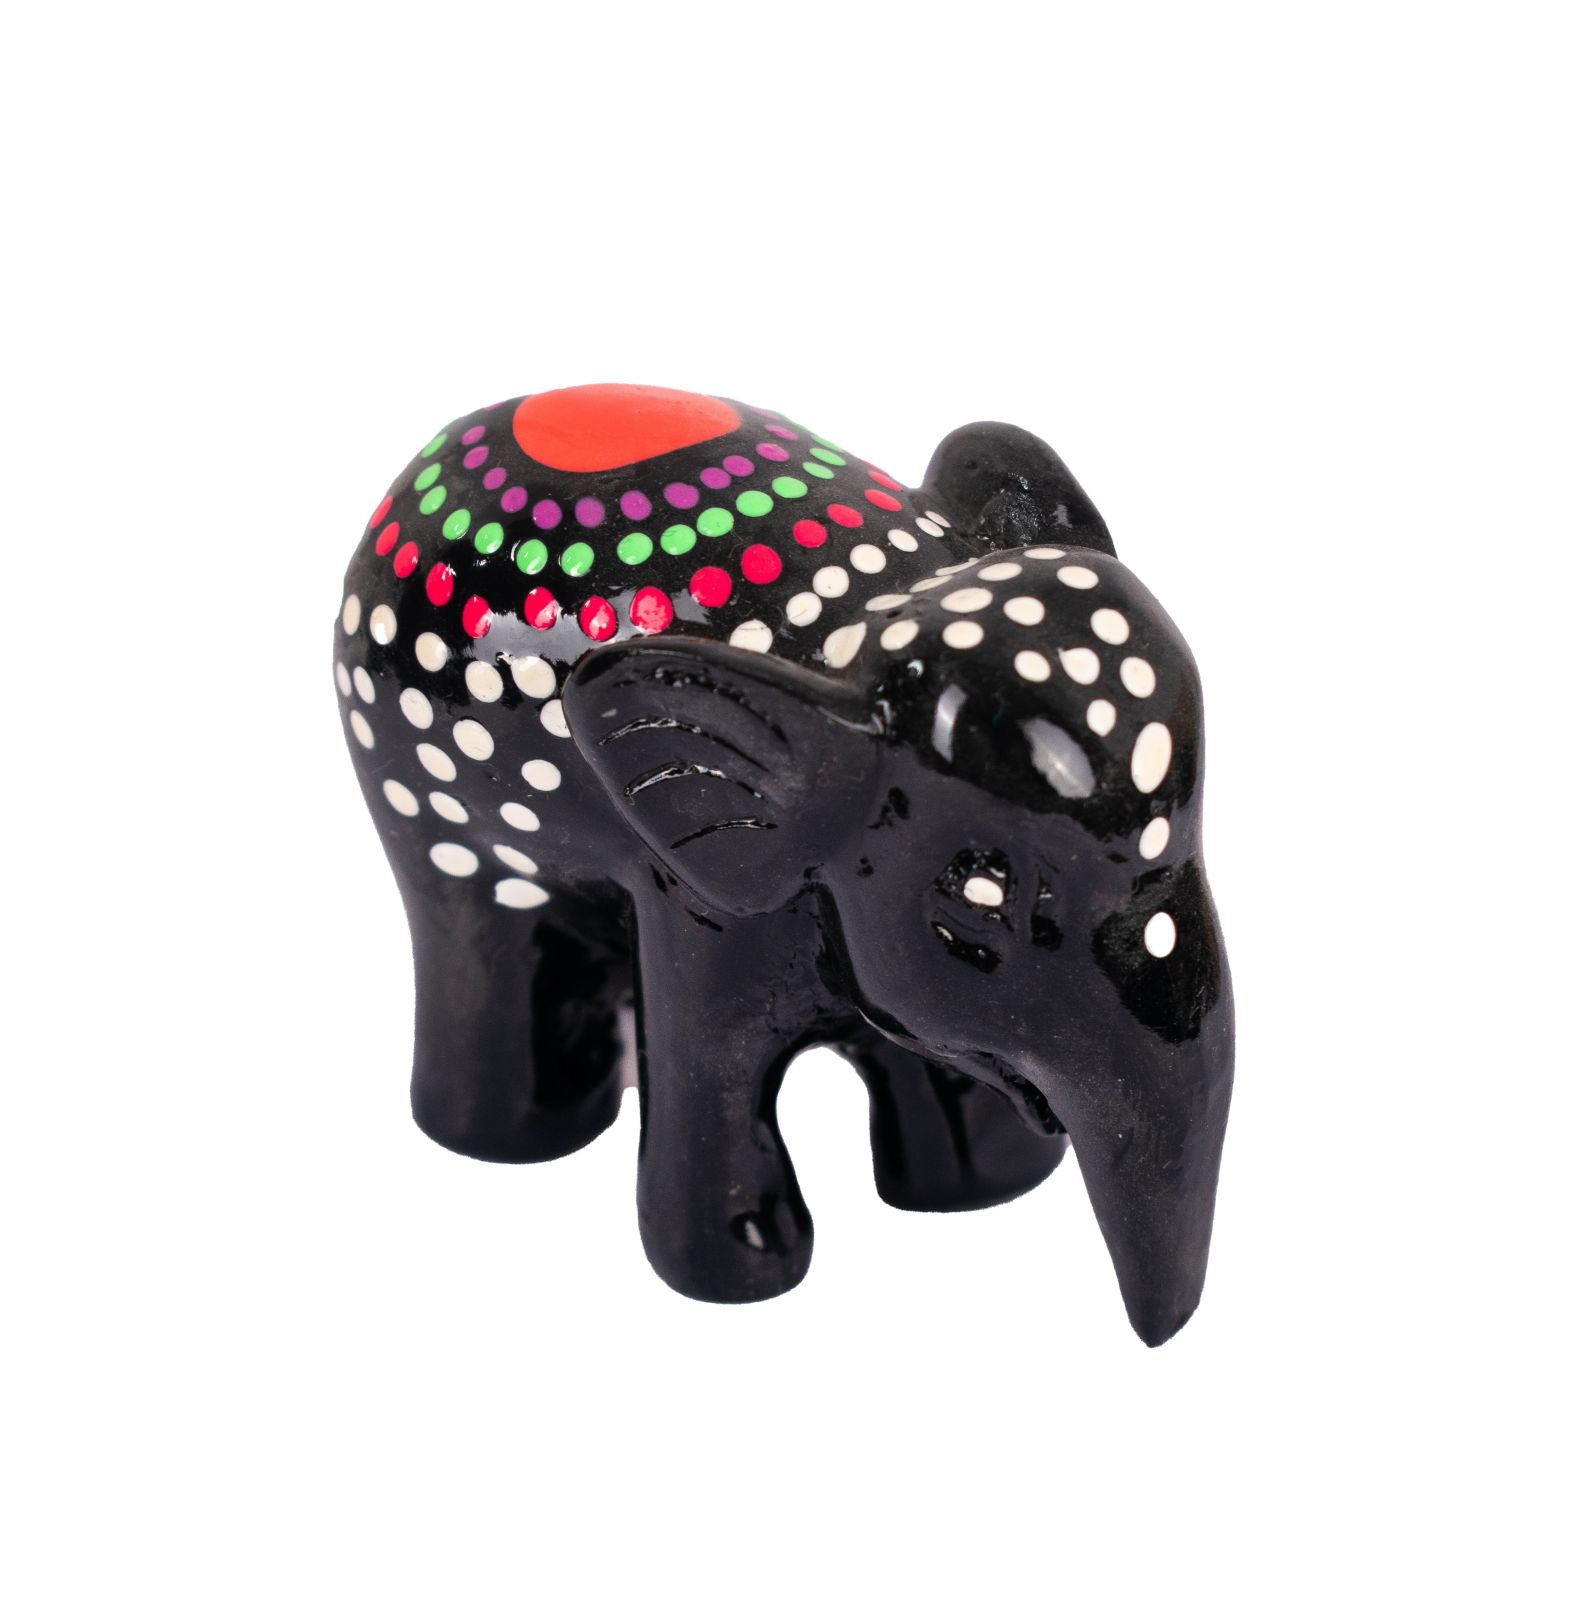 Hand-painted elephant statuette Kuping Malam Thailand